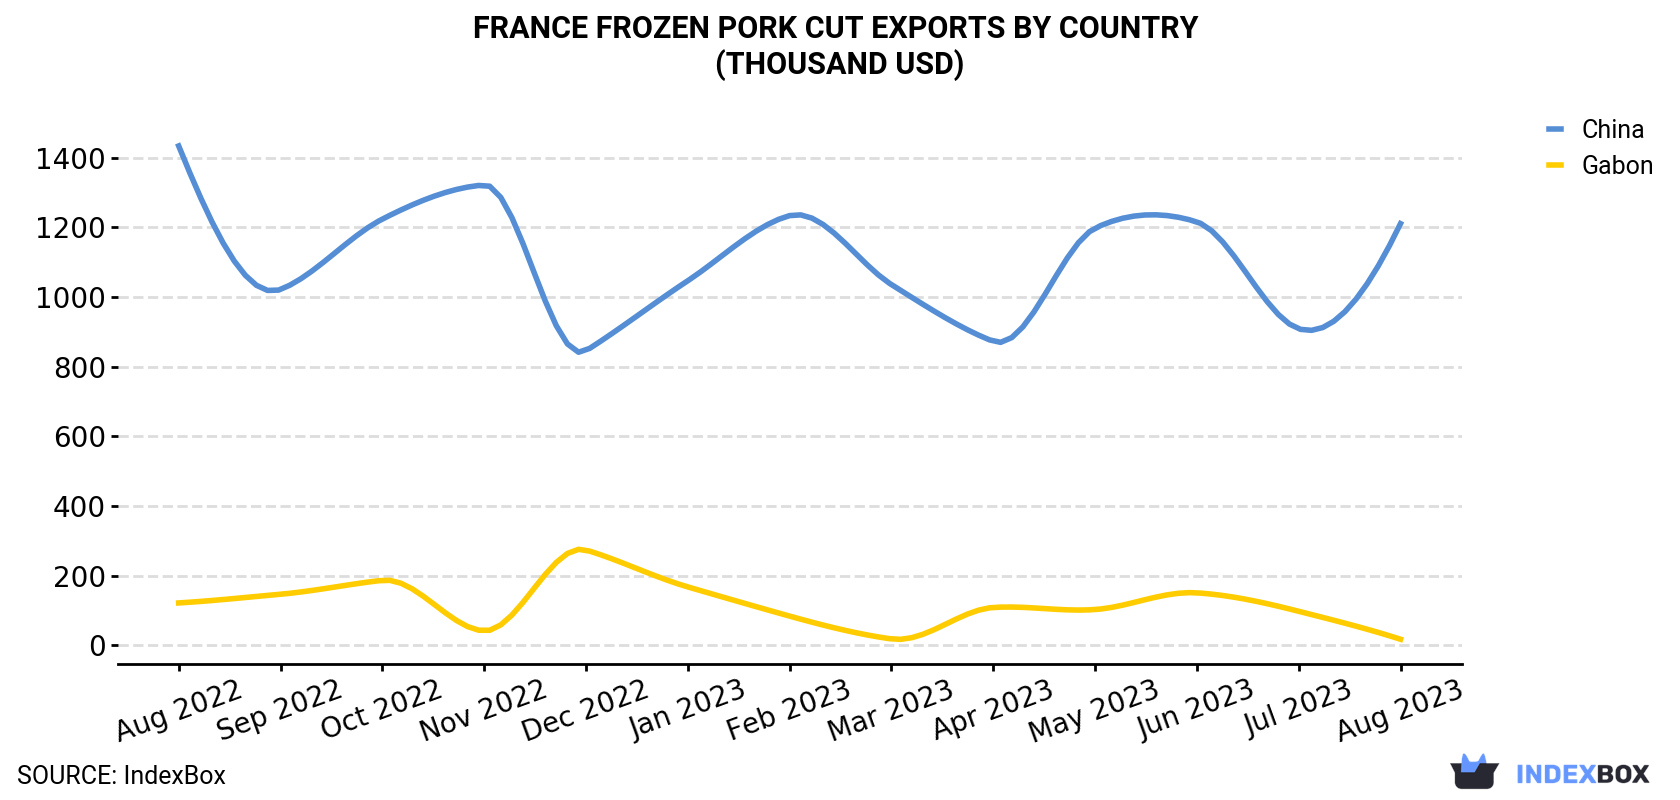 France Frozen Pork Cut Exports By Country (Thousand USD)